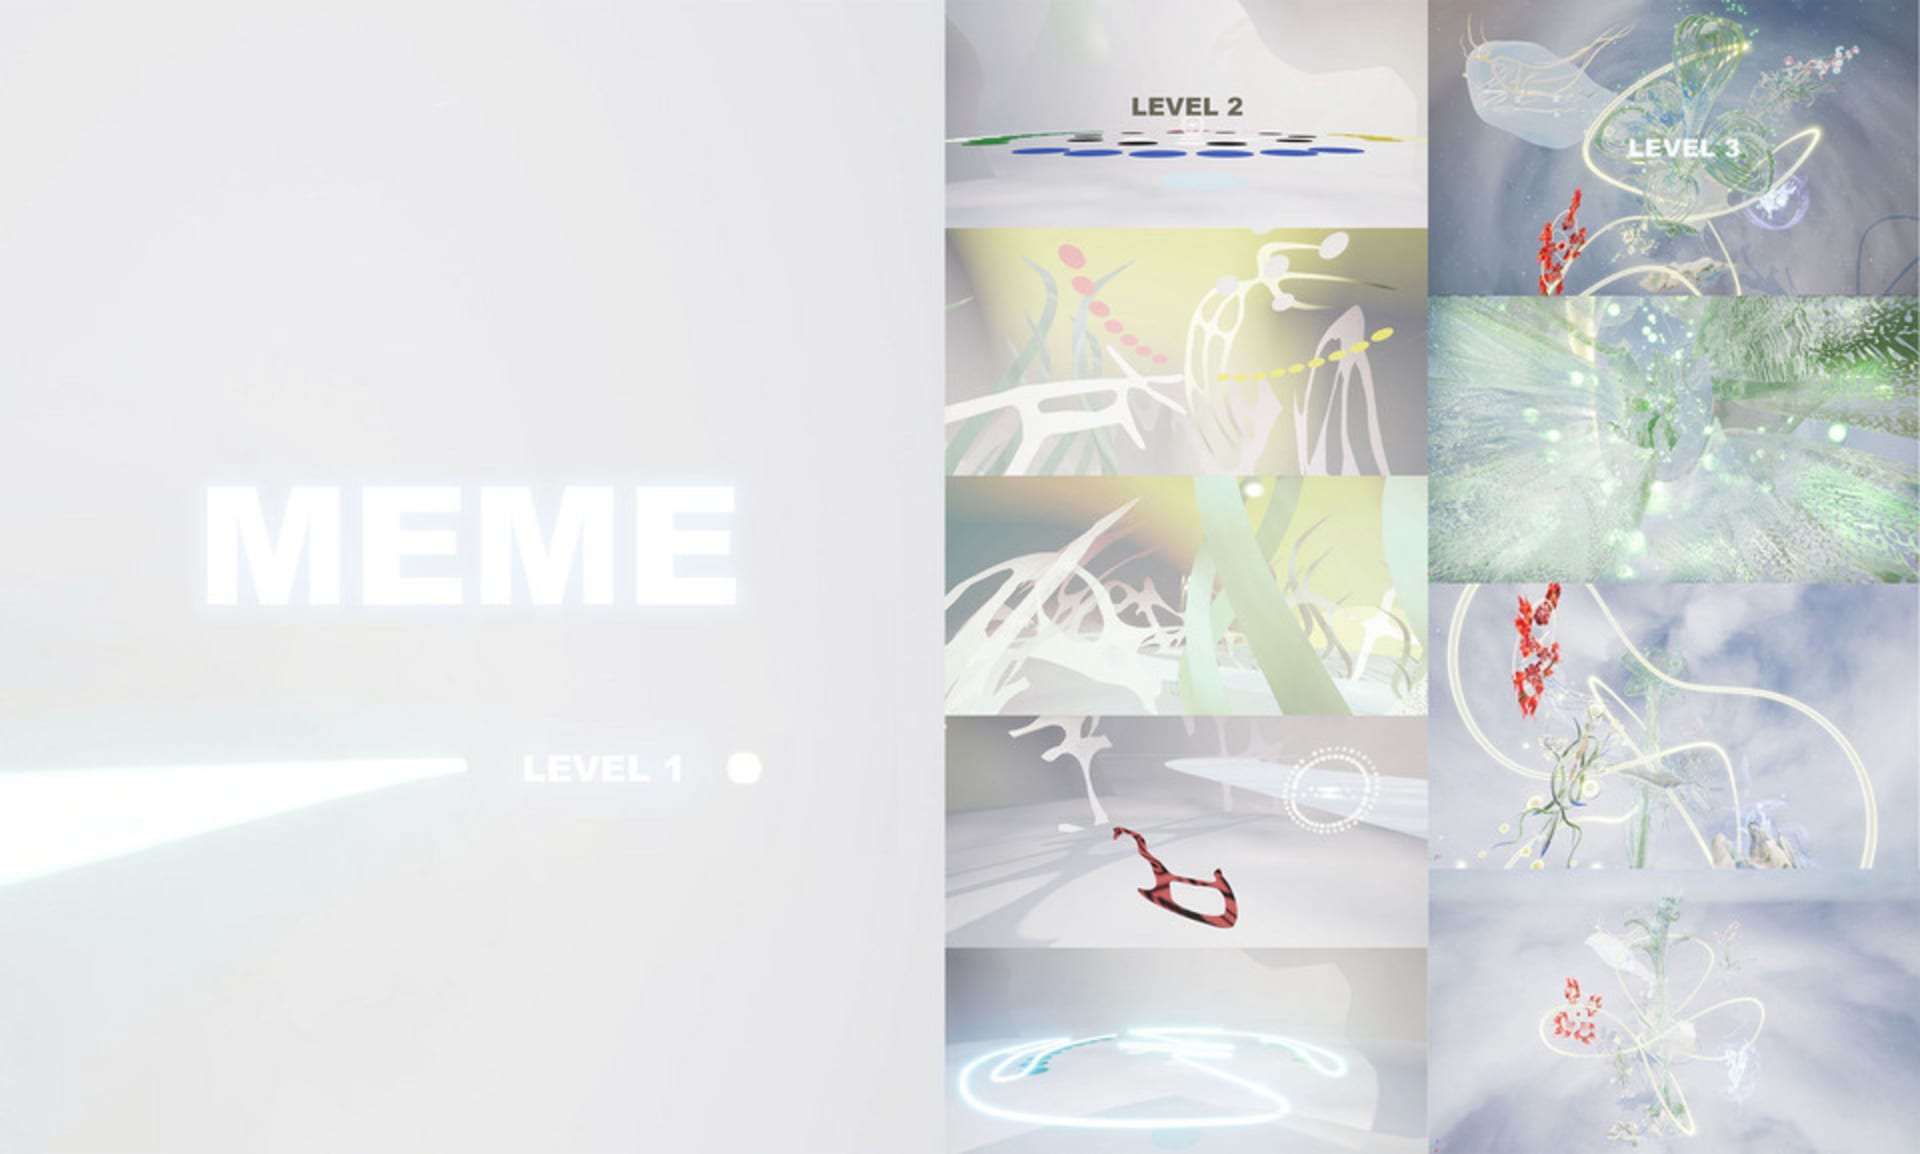 MEME is a first-person VR game
3 levels in the game-3 dimensions